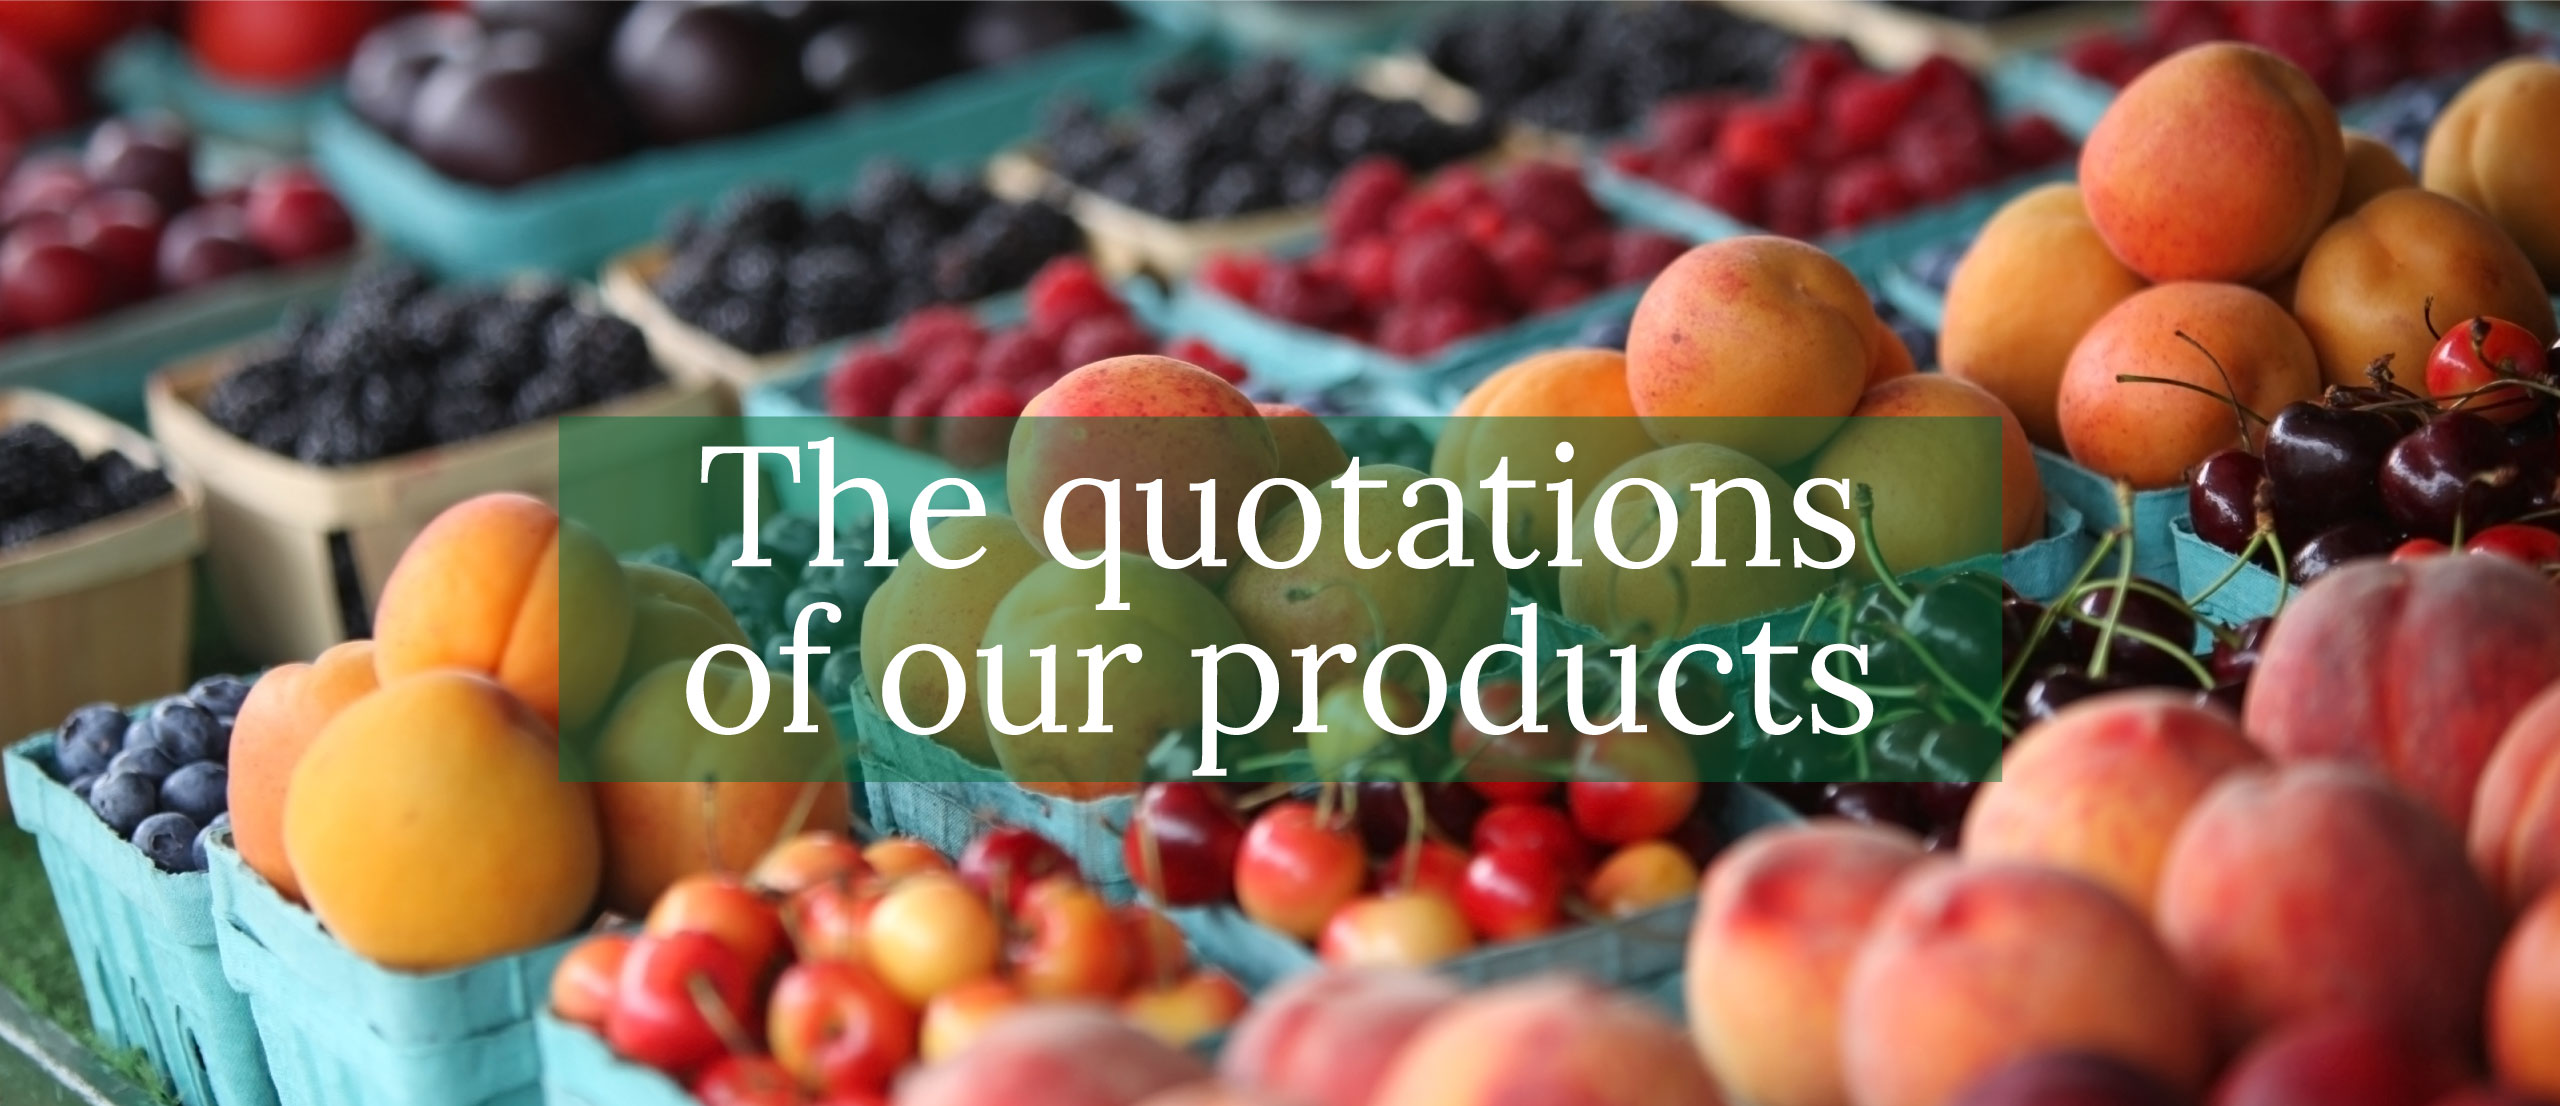 The quotations of our products - Ortofrutta Lo Casto